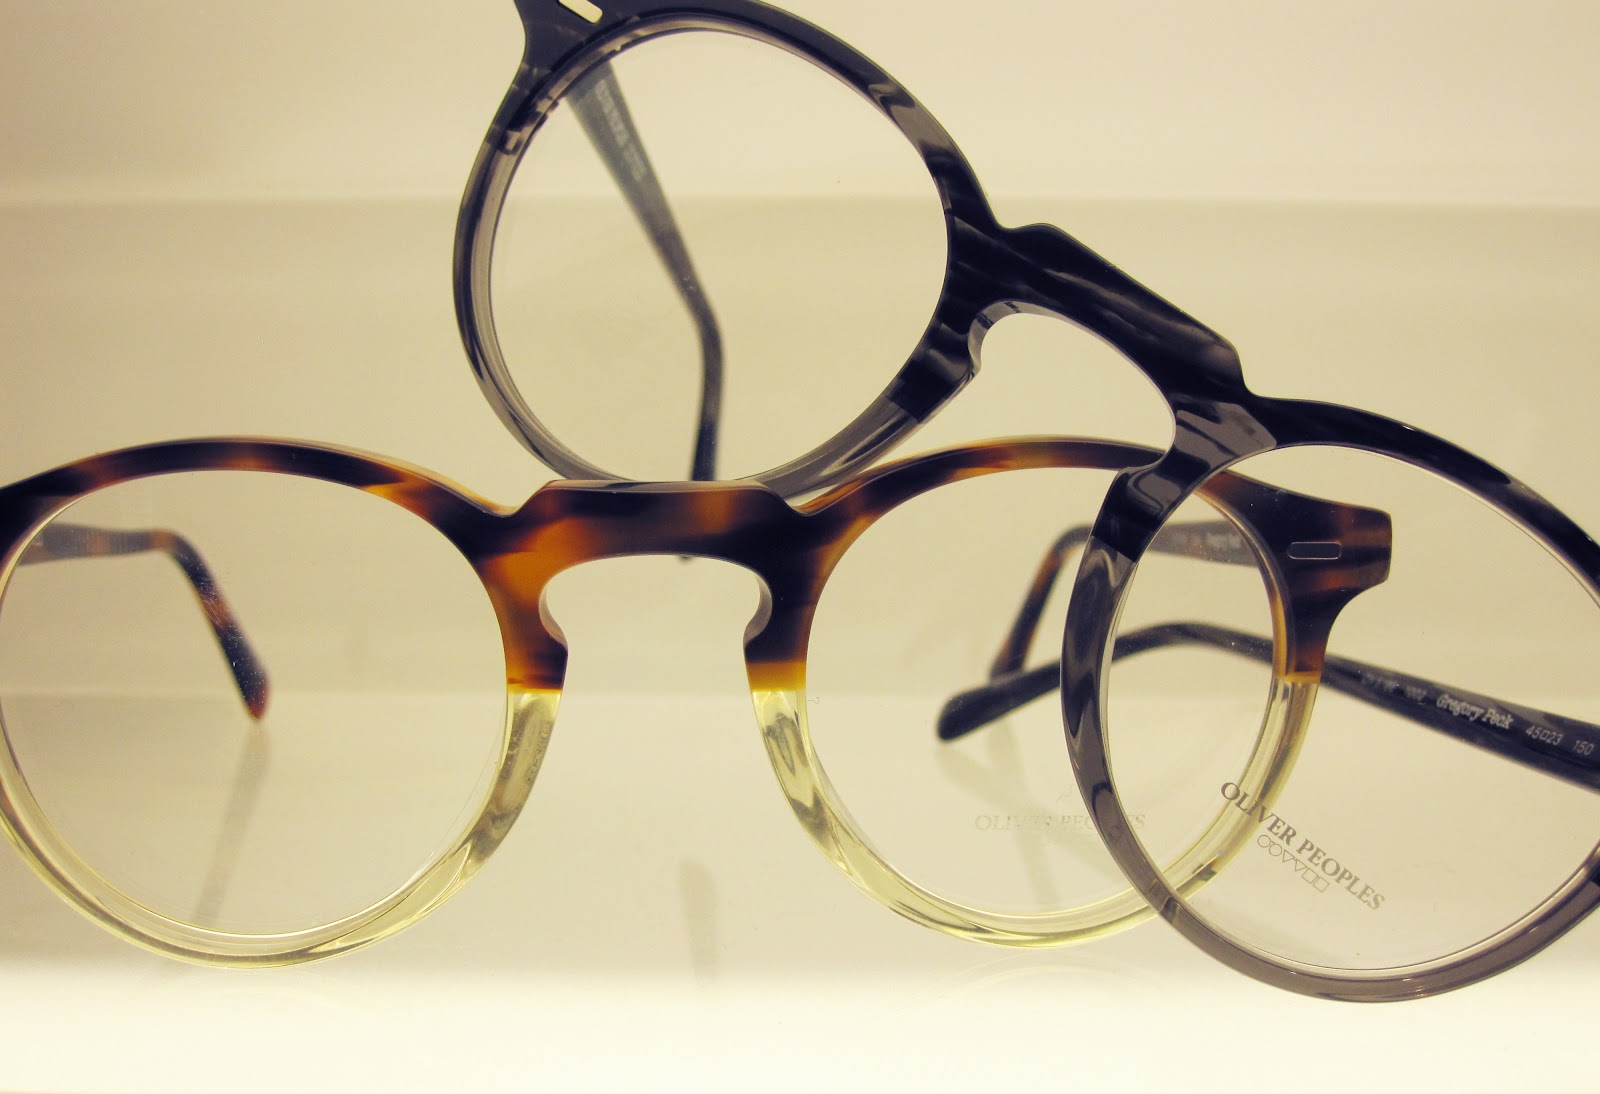 SPECTACLE LOVES YOU.: Coming Soon, the Oliver Peoples 2012 Spring